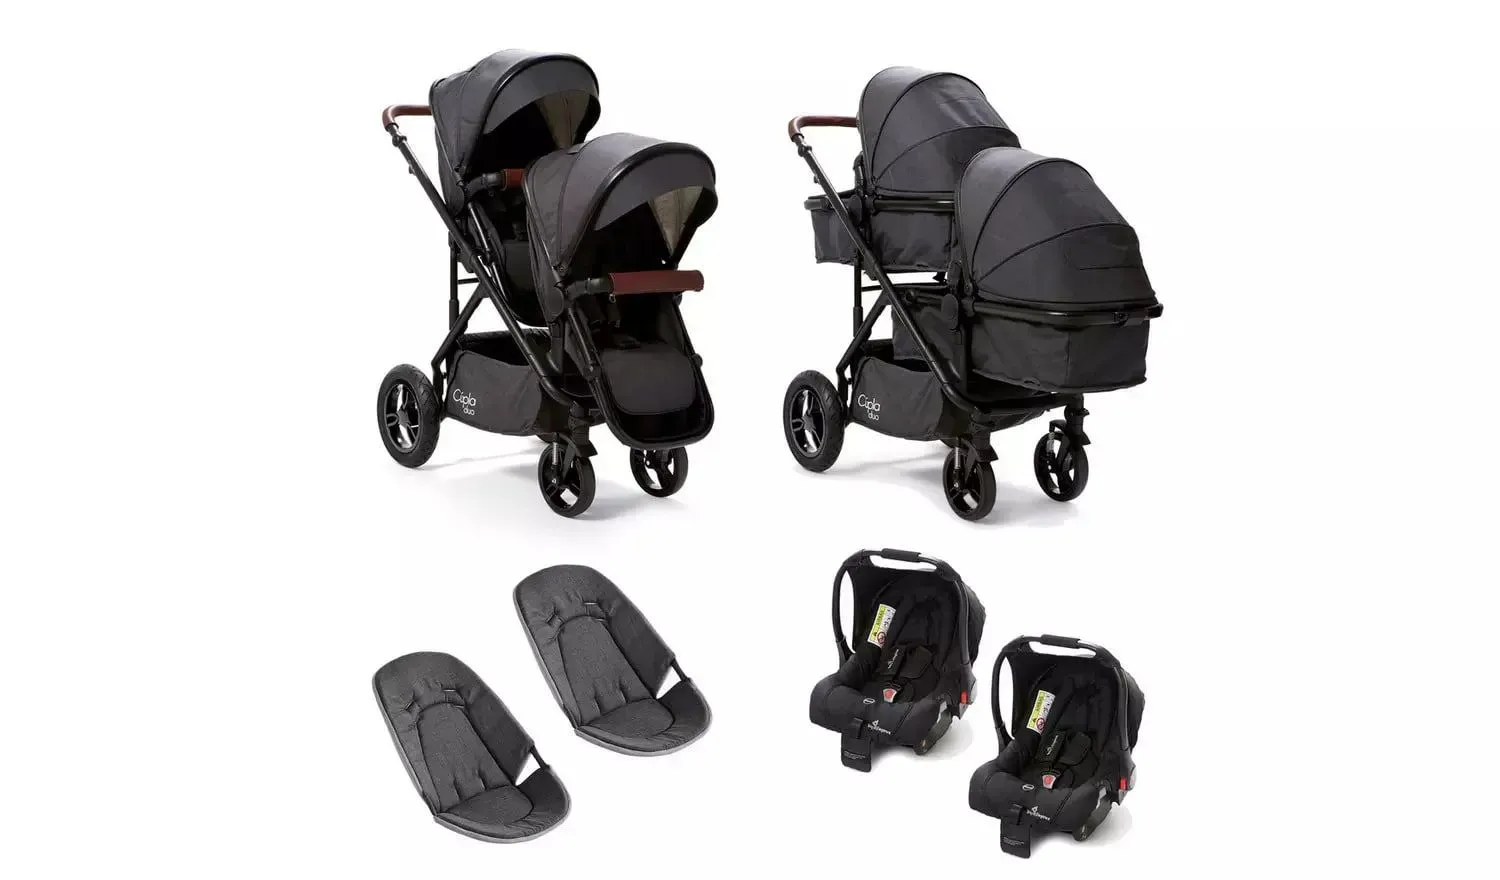 Adaptable and flexible plain black pushchair for twins.